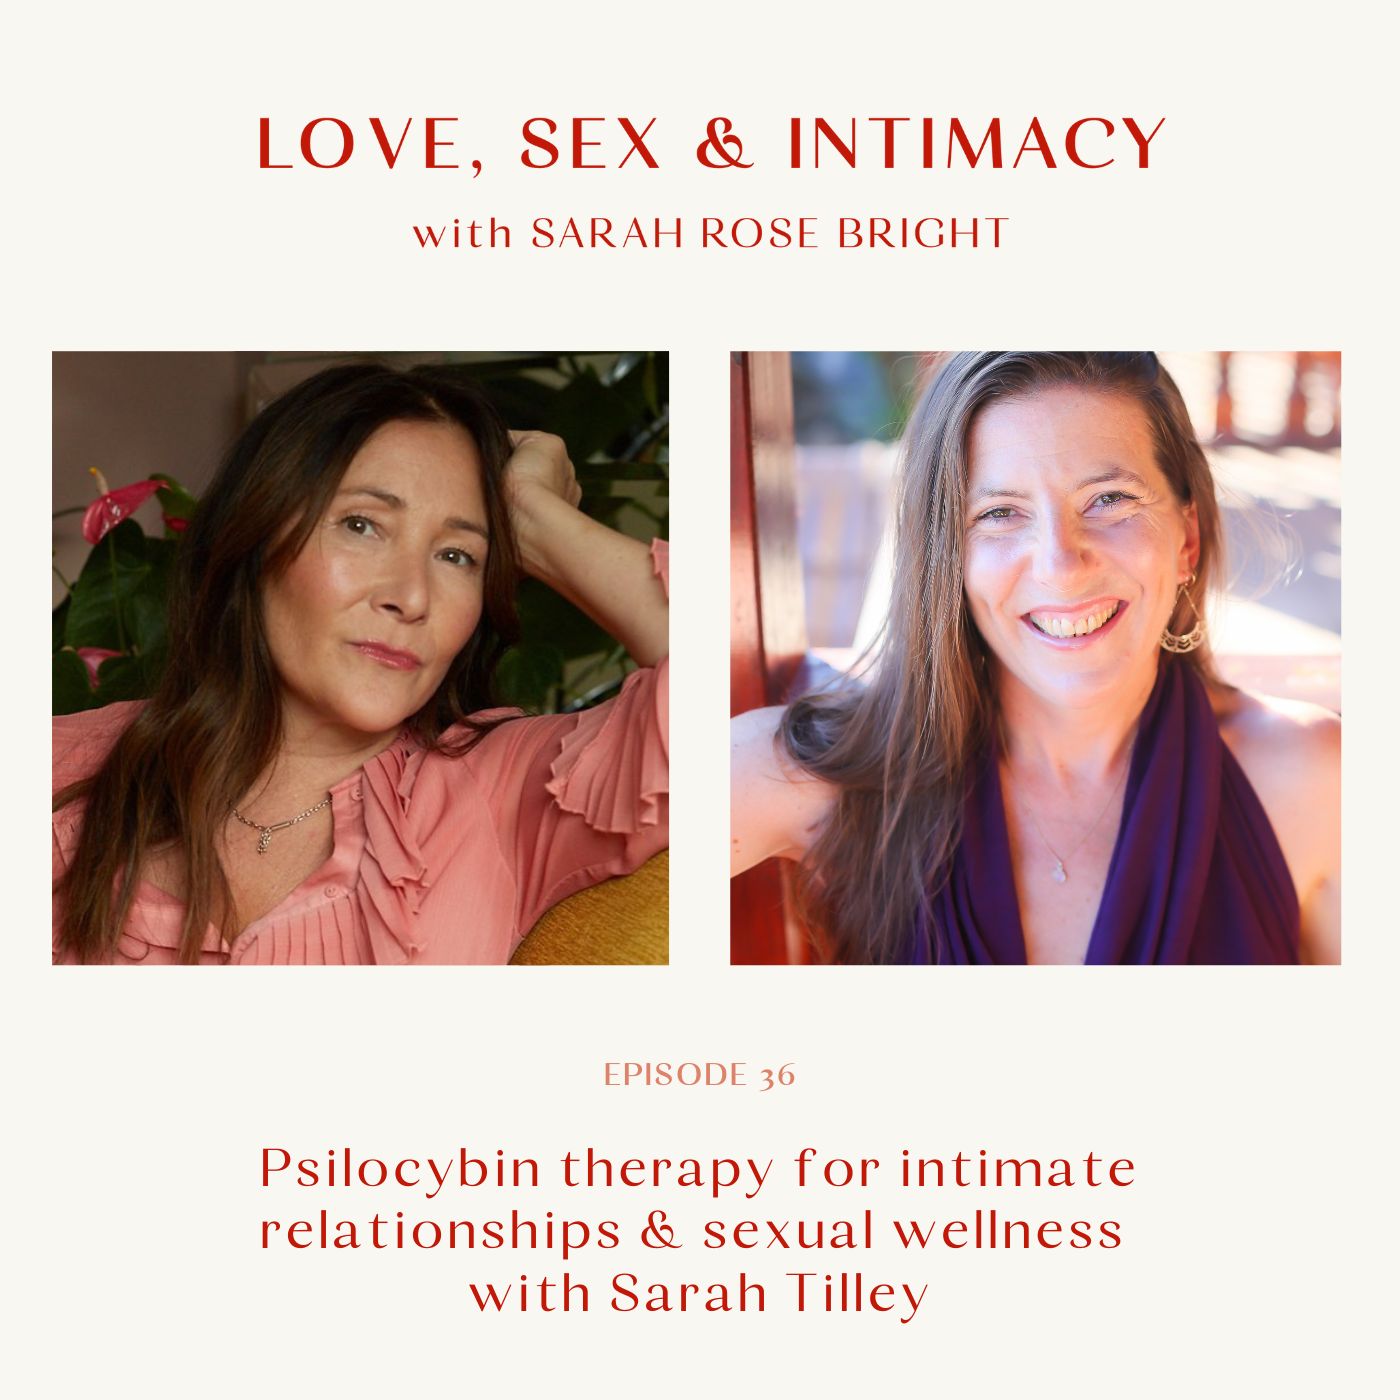 Psilocybin therapy for intimate relationships and sexual wellness with Sarah Tilley